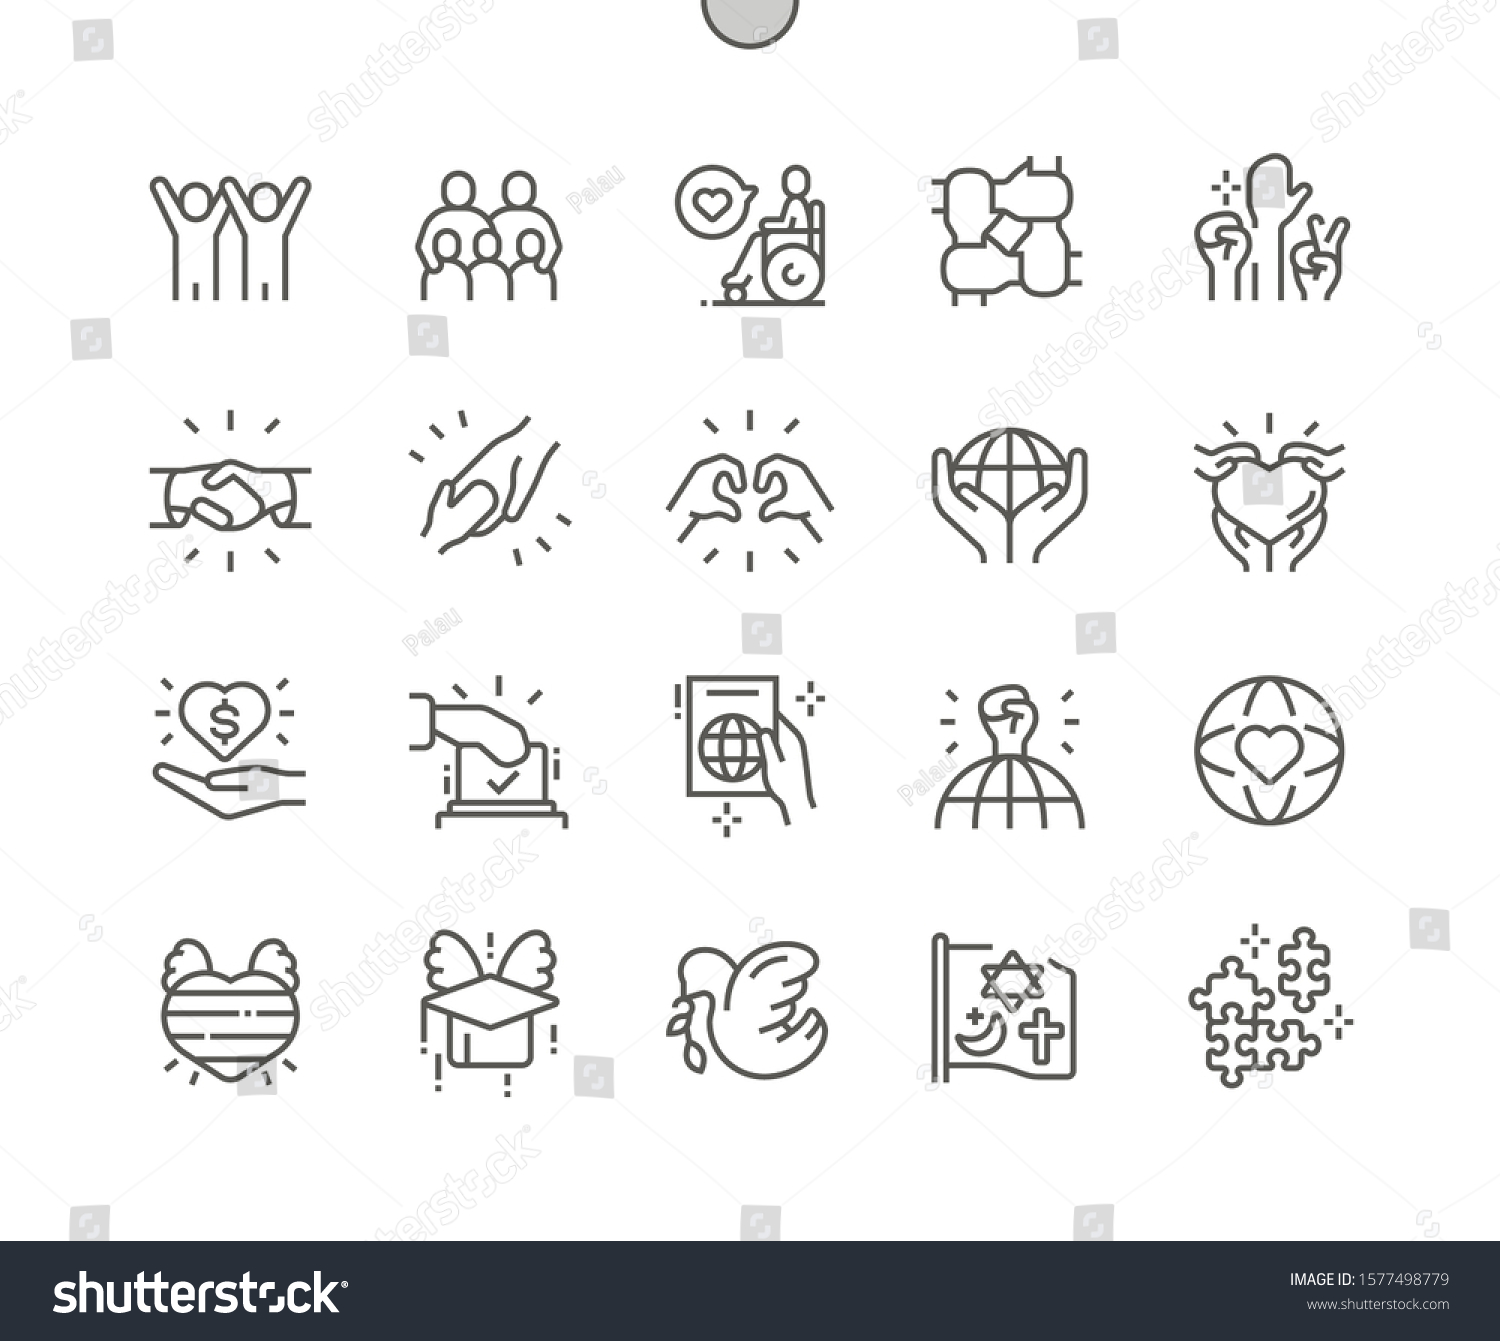 SVG of Tolerance Well-crafted Pixel Perfect Vector Thin Line Icons 30 2x Grid for Web Graphics and Apps. Simple Minimal Pictogram svg